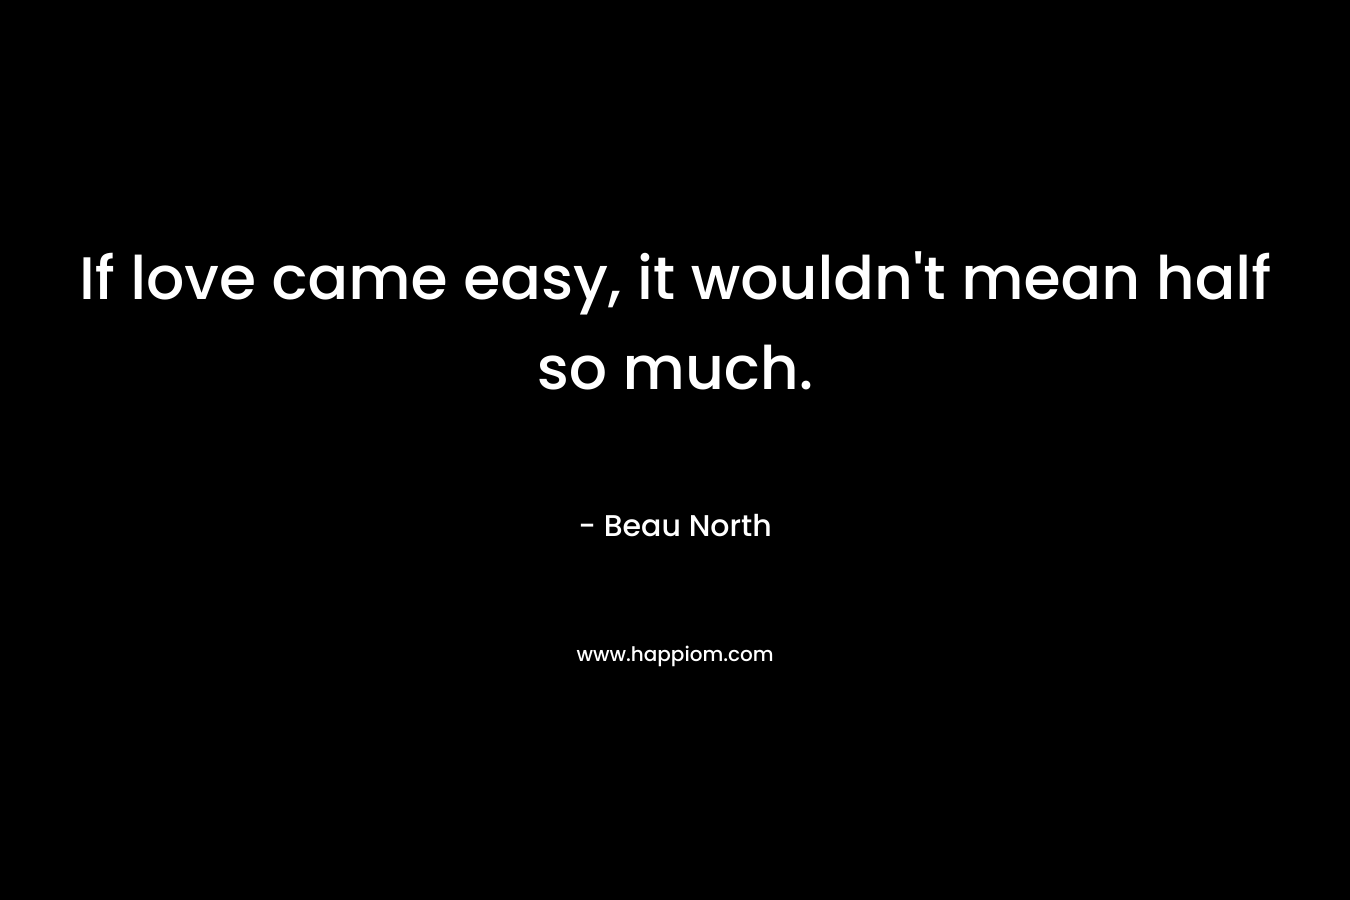 If love came easy, it wouldn’t mean half so much. – Beau North